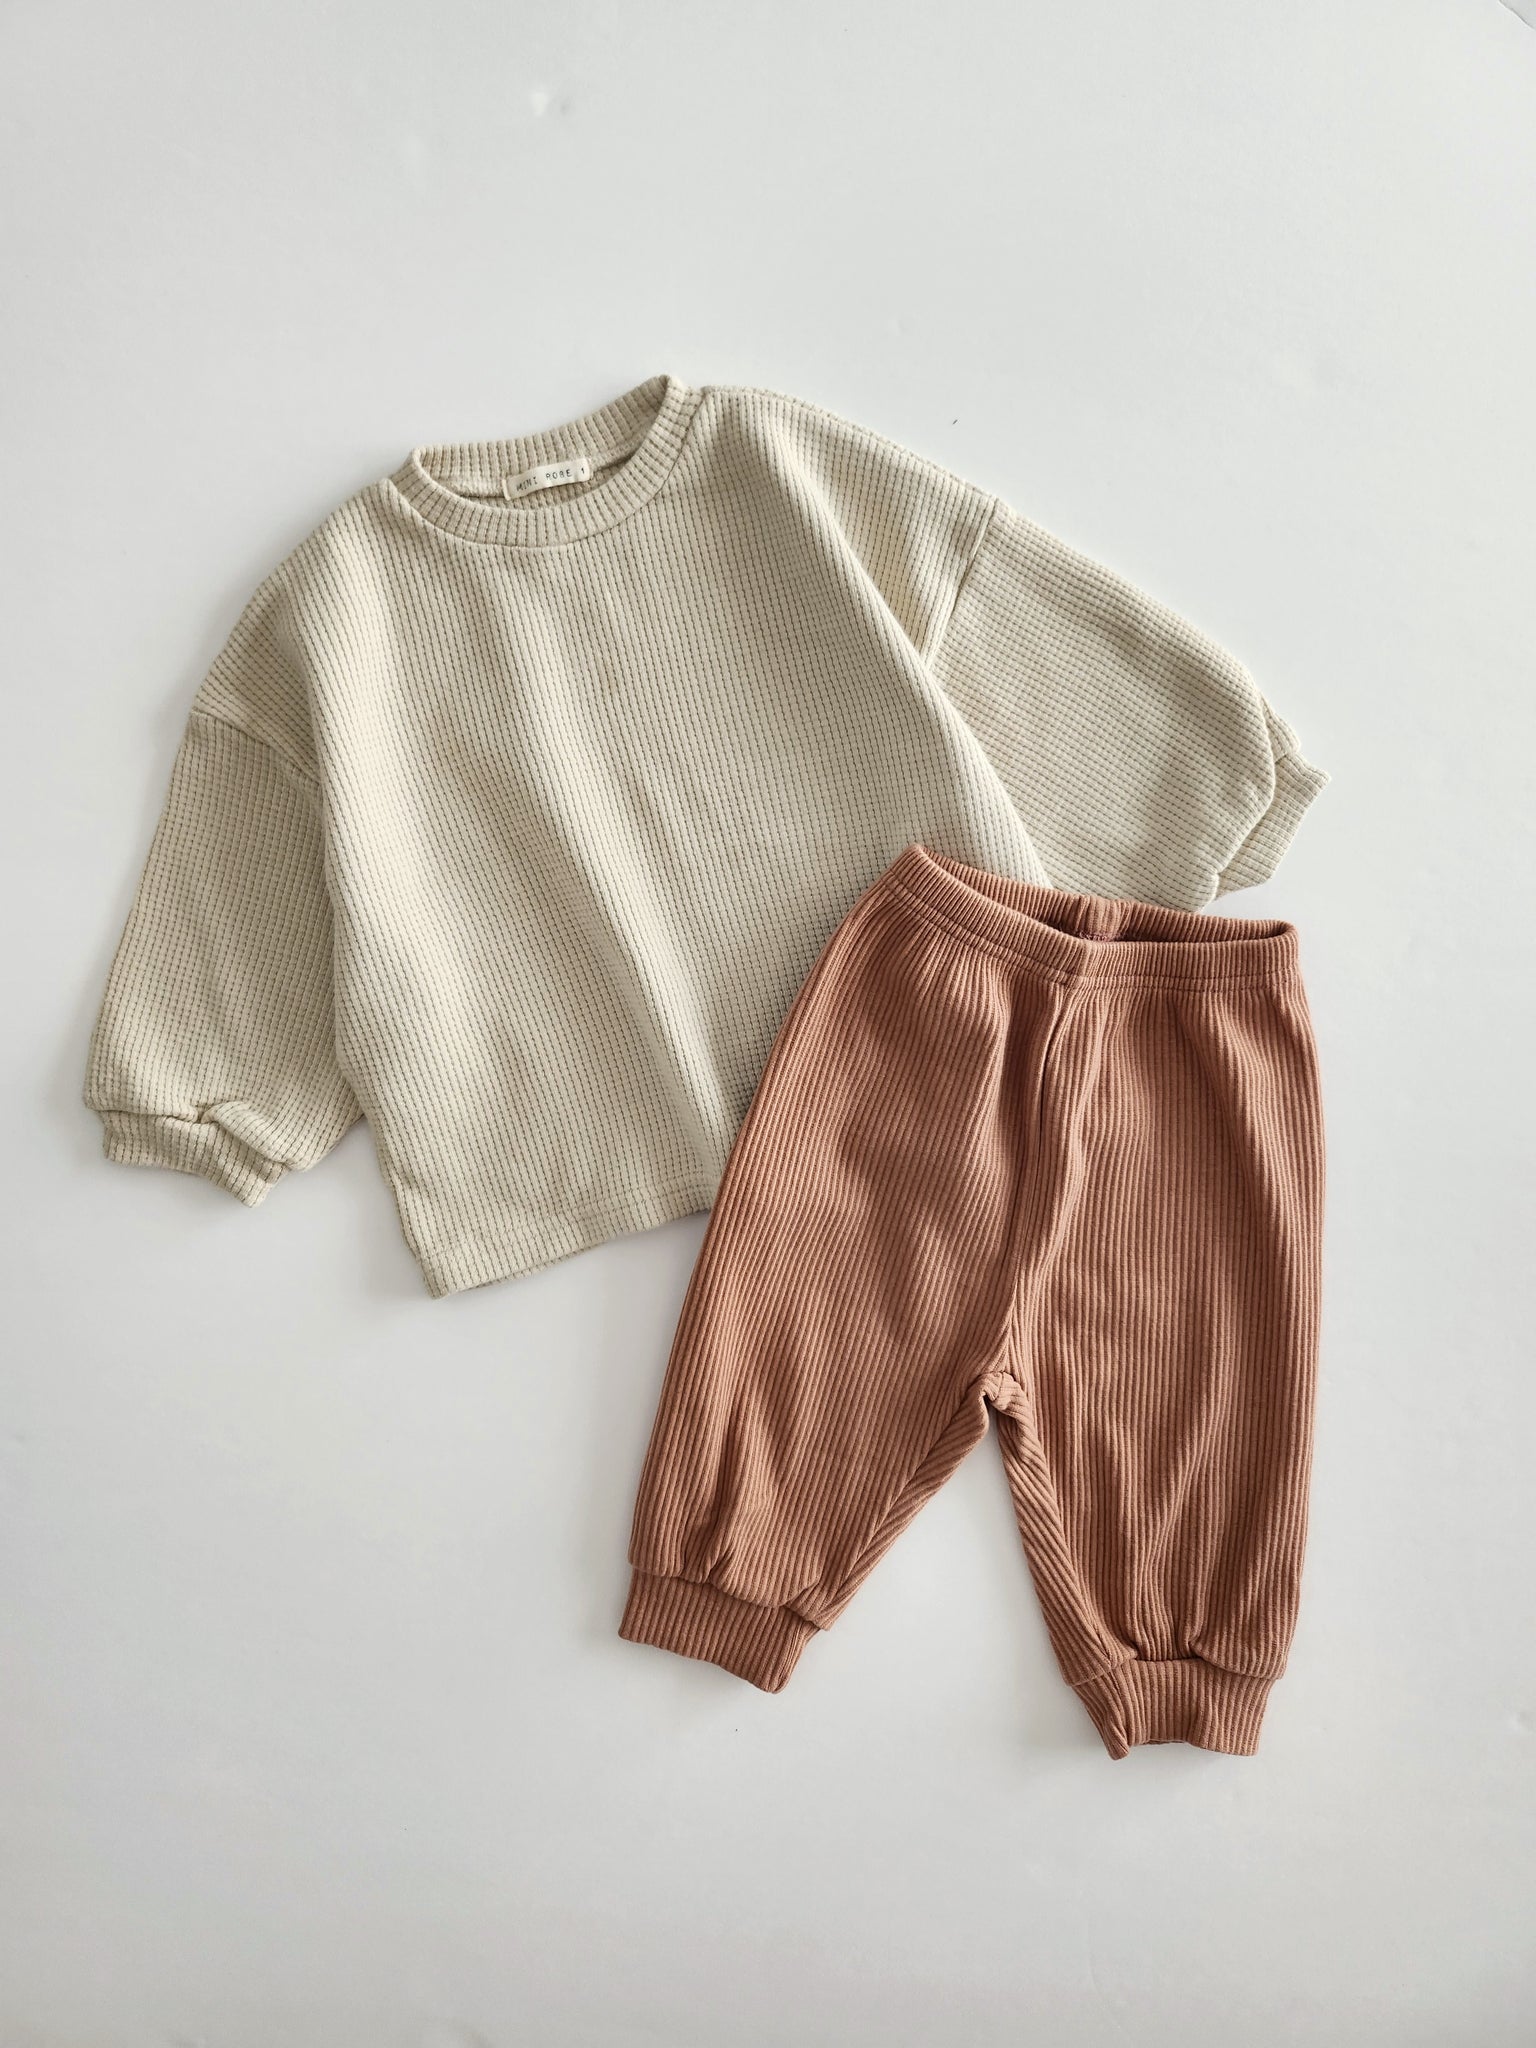 Toddler Waffle Long Sleeve Top (10m-4y) - 2 Colors